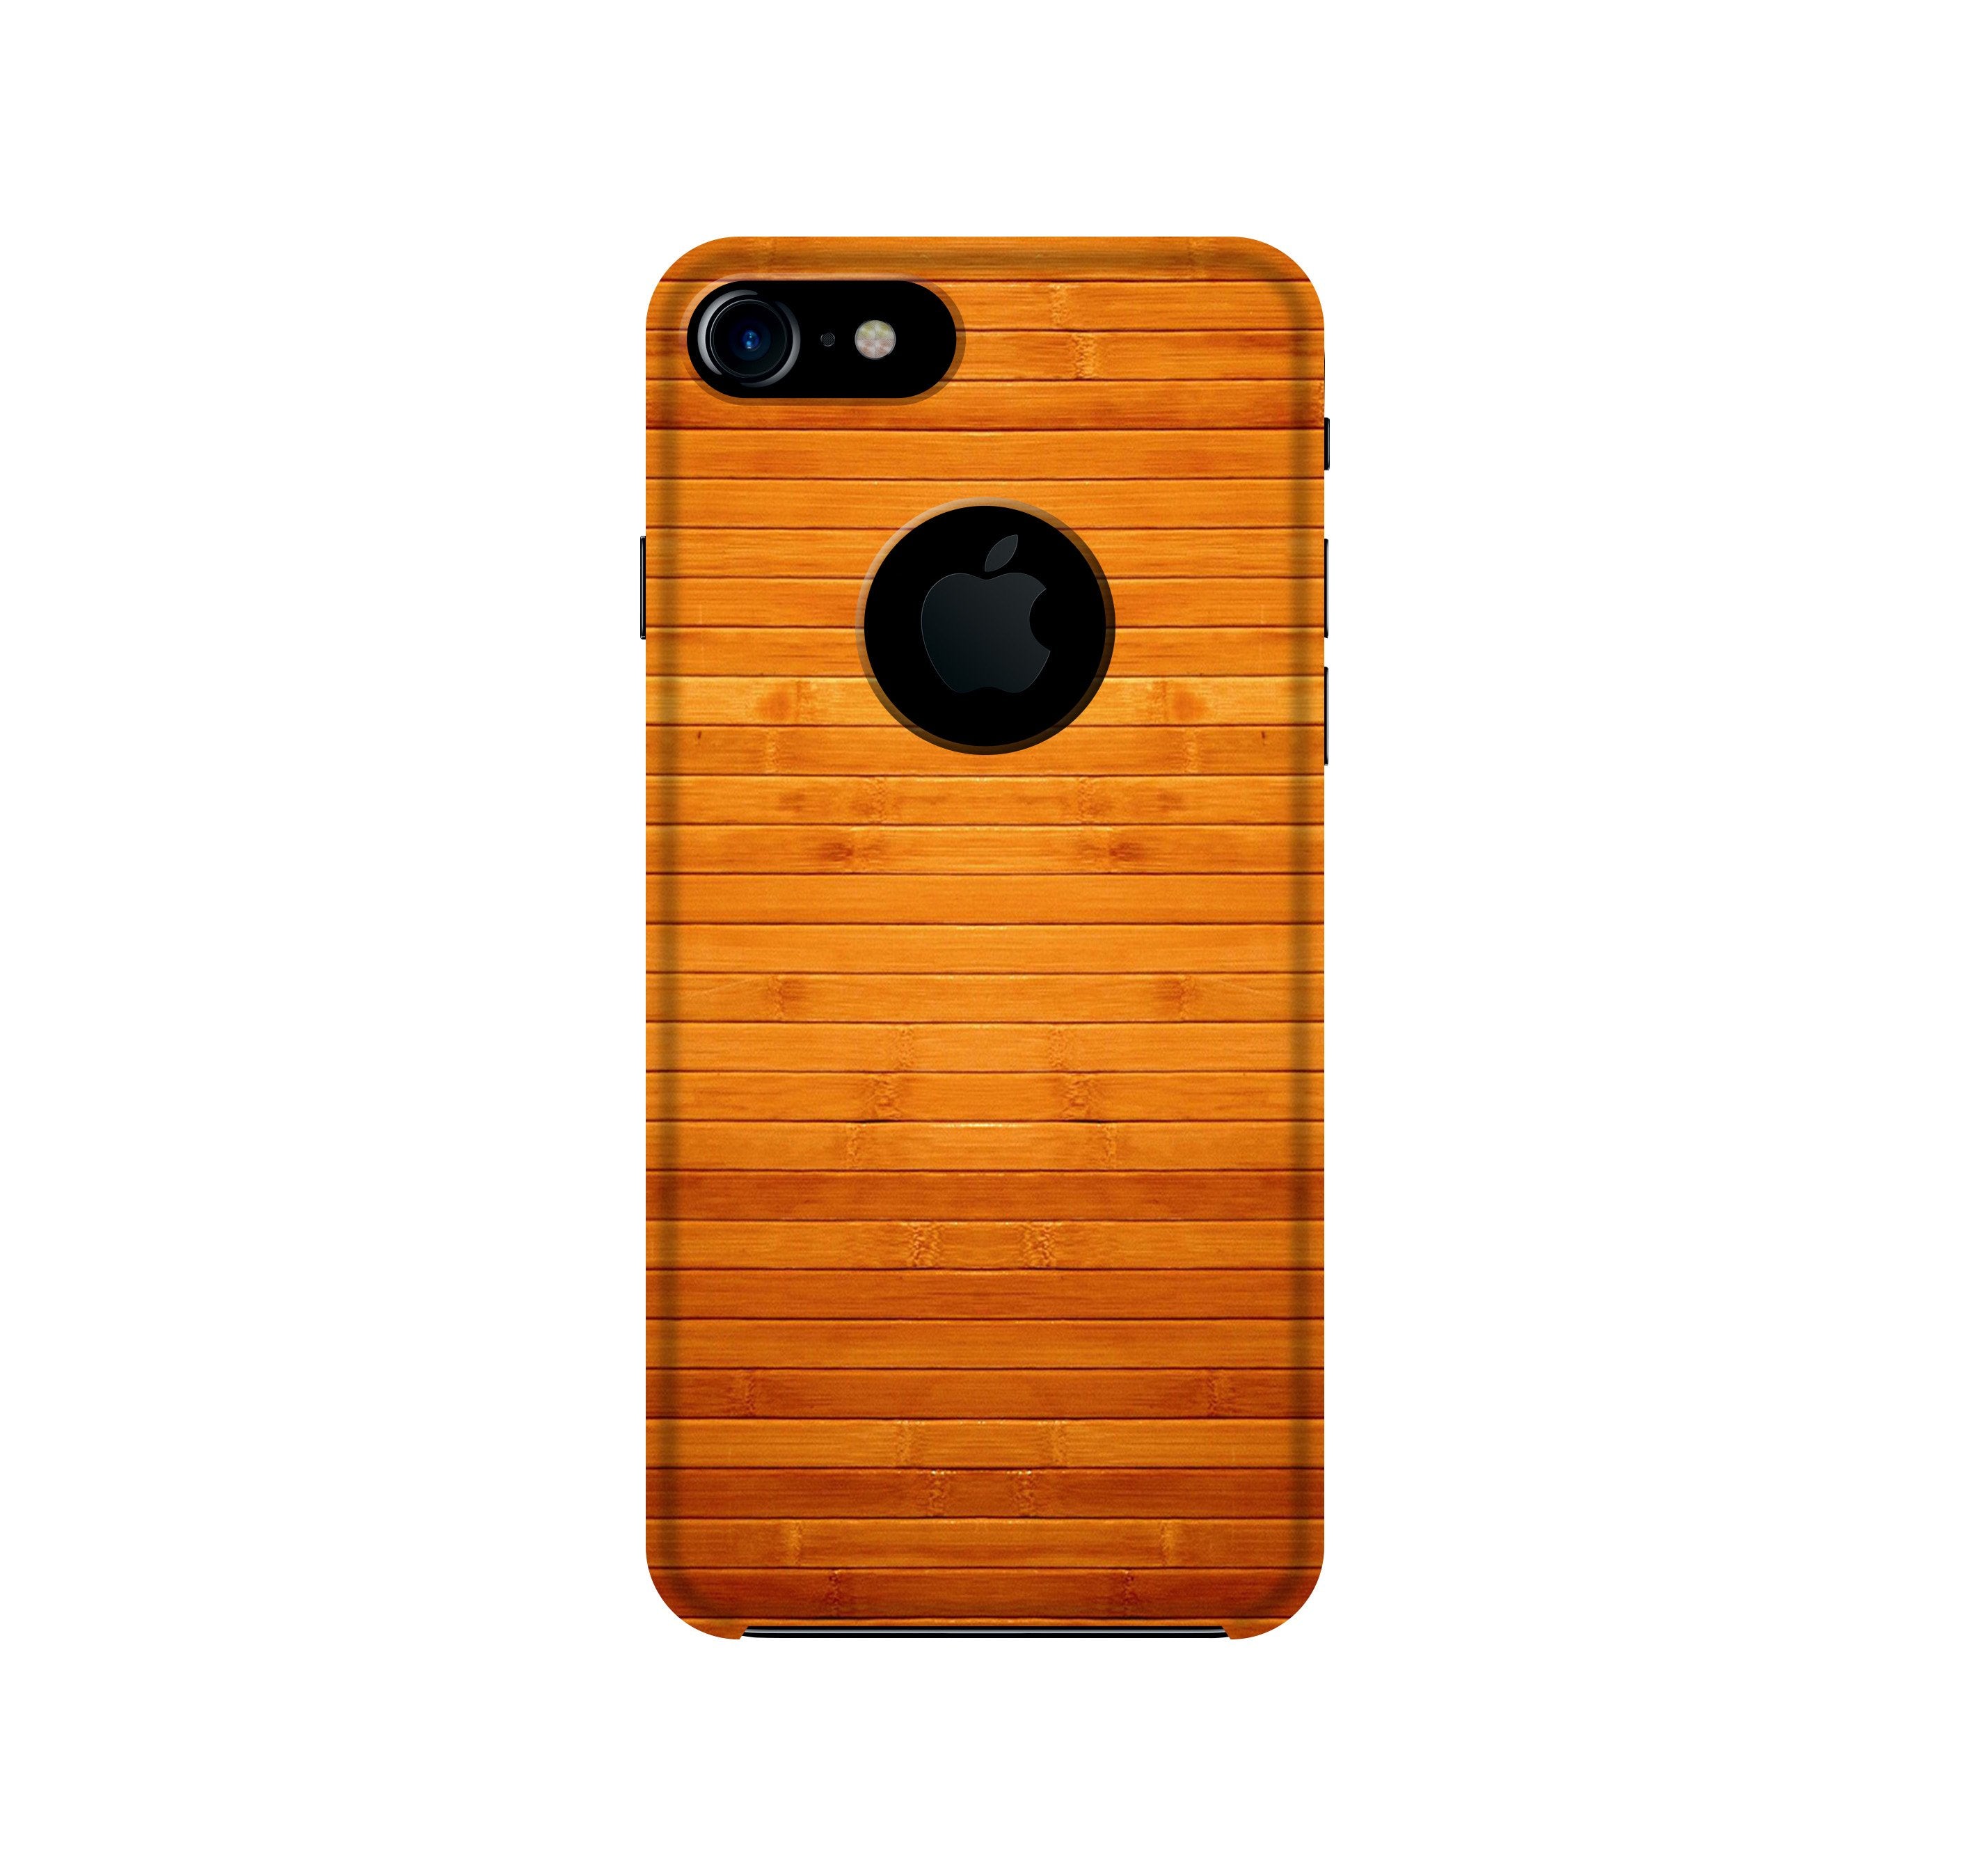 Wooden Look Case for iPhone 7 logo cut(Design - 111)